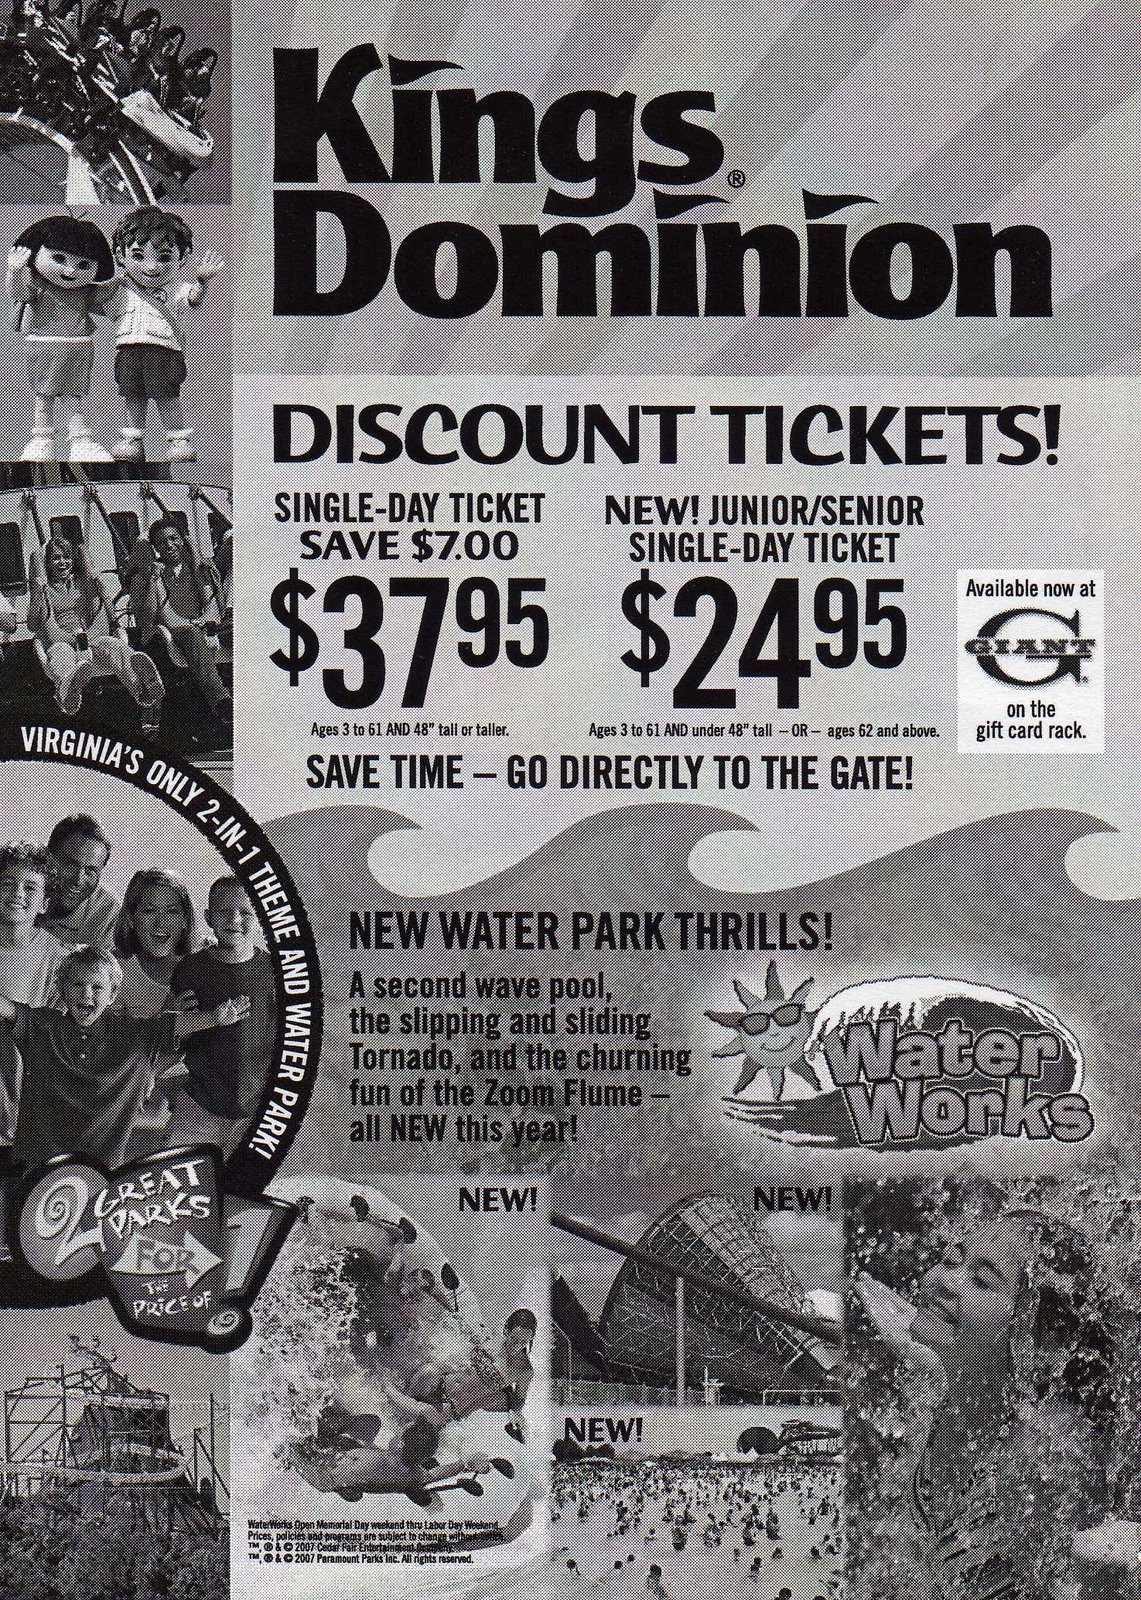 [kings-dominion-coupon-discount.jpg]